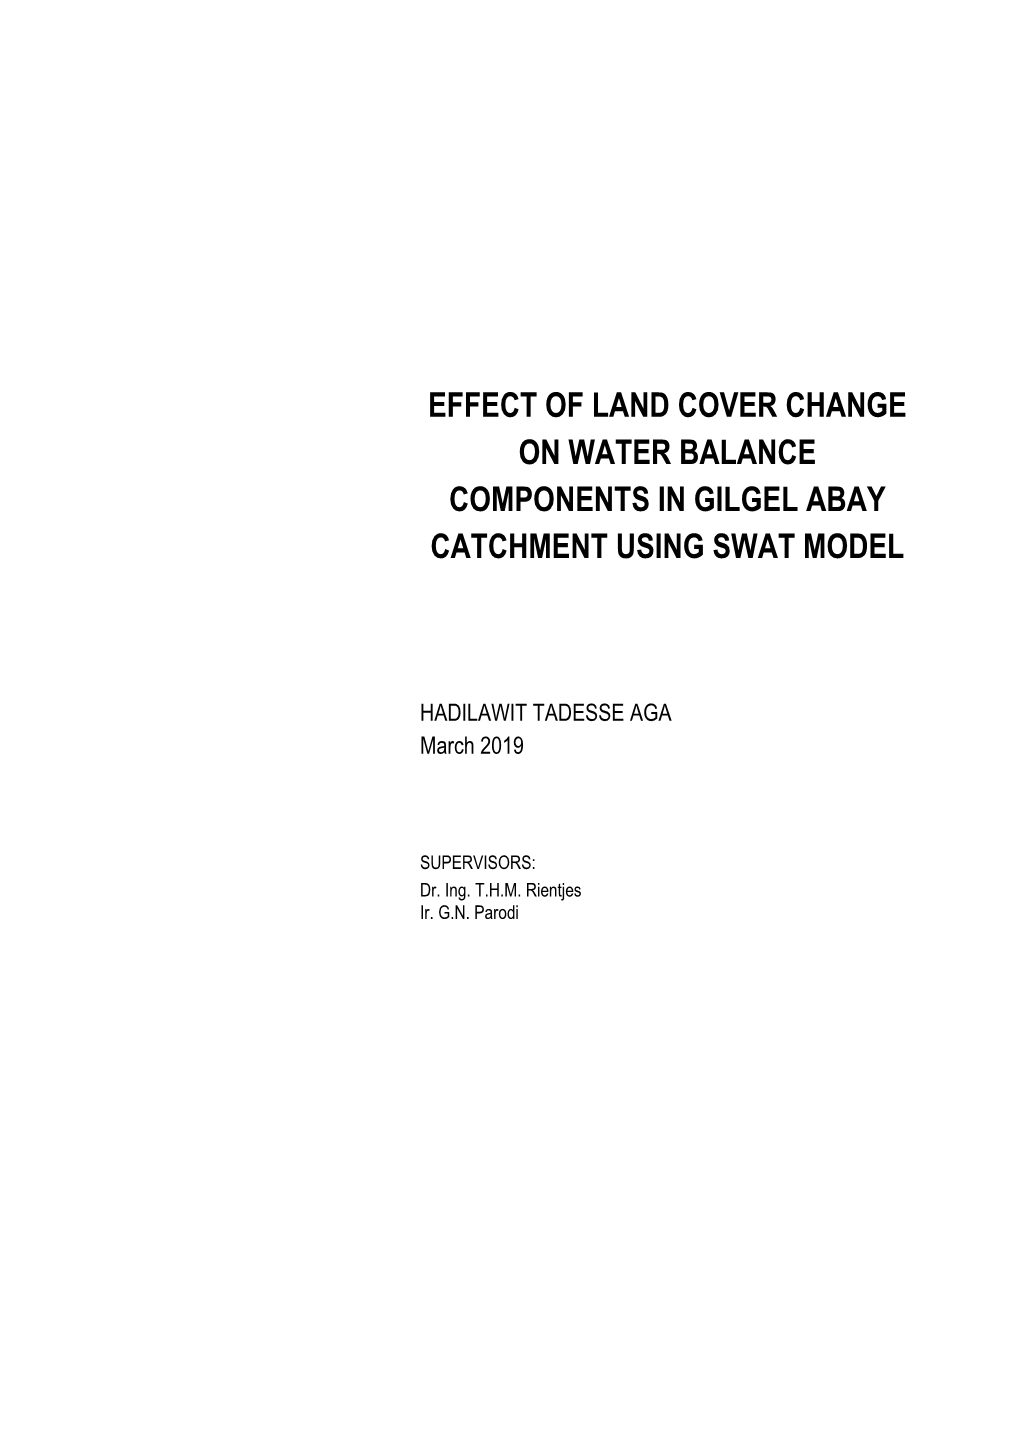 Effect of Land Cover Change on Water Balance Components in Gilgel Abay Catchment Using Swat Model